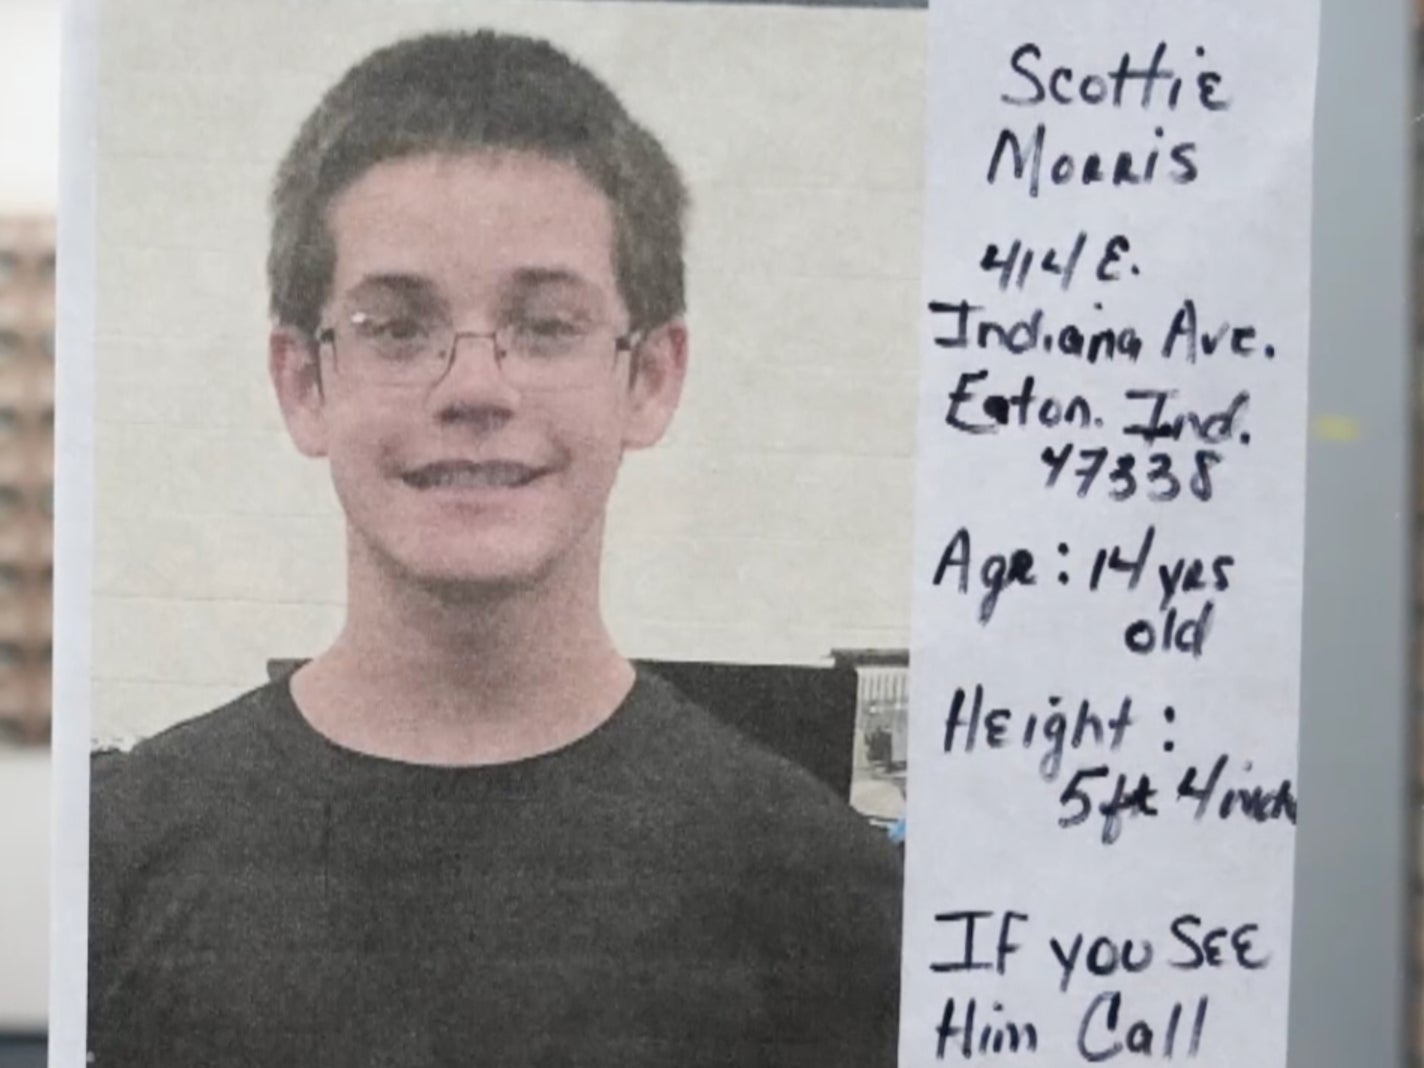 A poster shows missing 14-year-old Scottie Morris